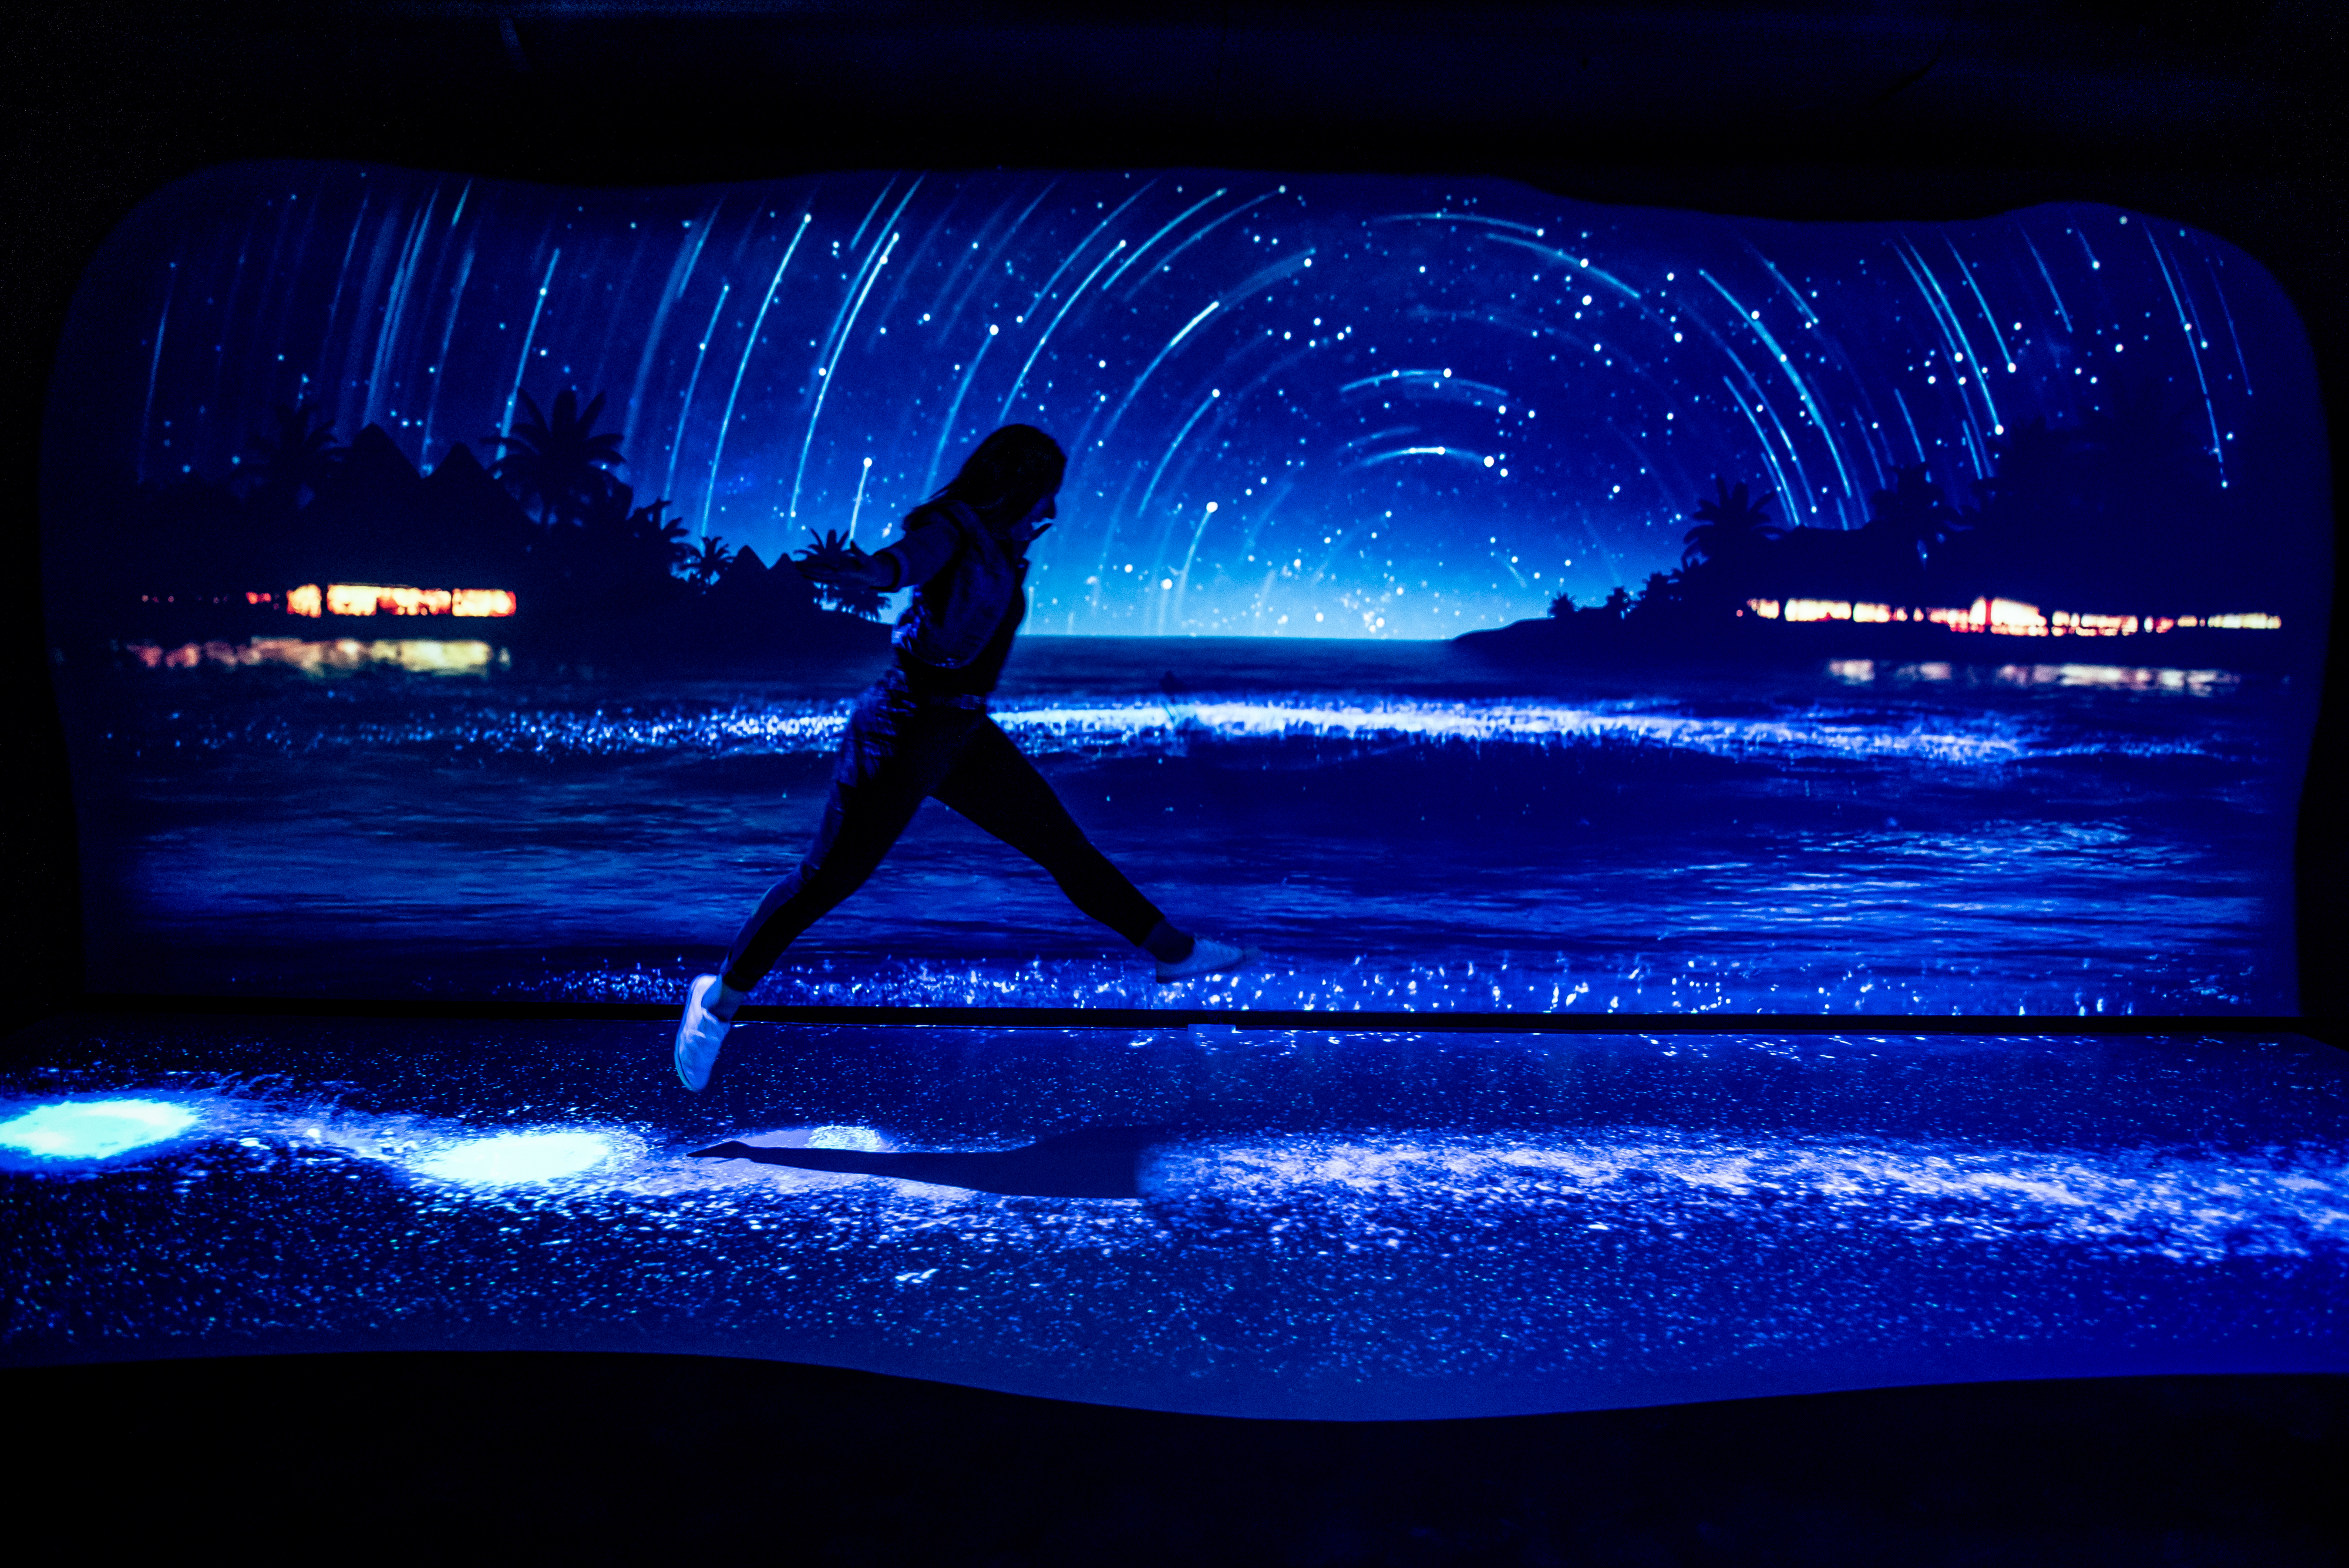 A Bioluminescent Ocean Glows Under Guest’S Footsteps At Night 2